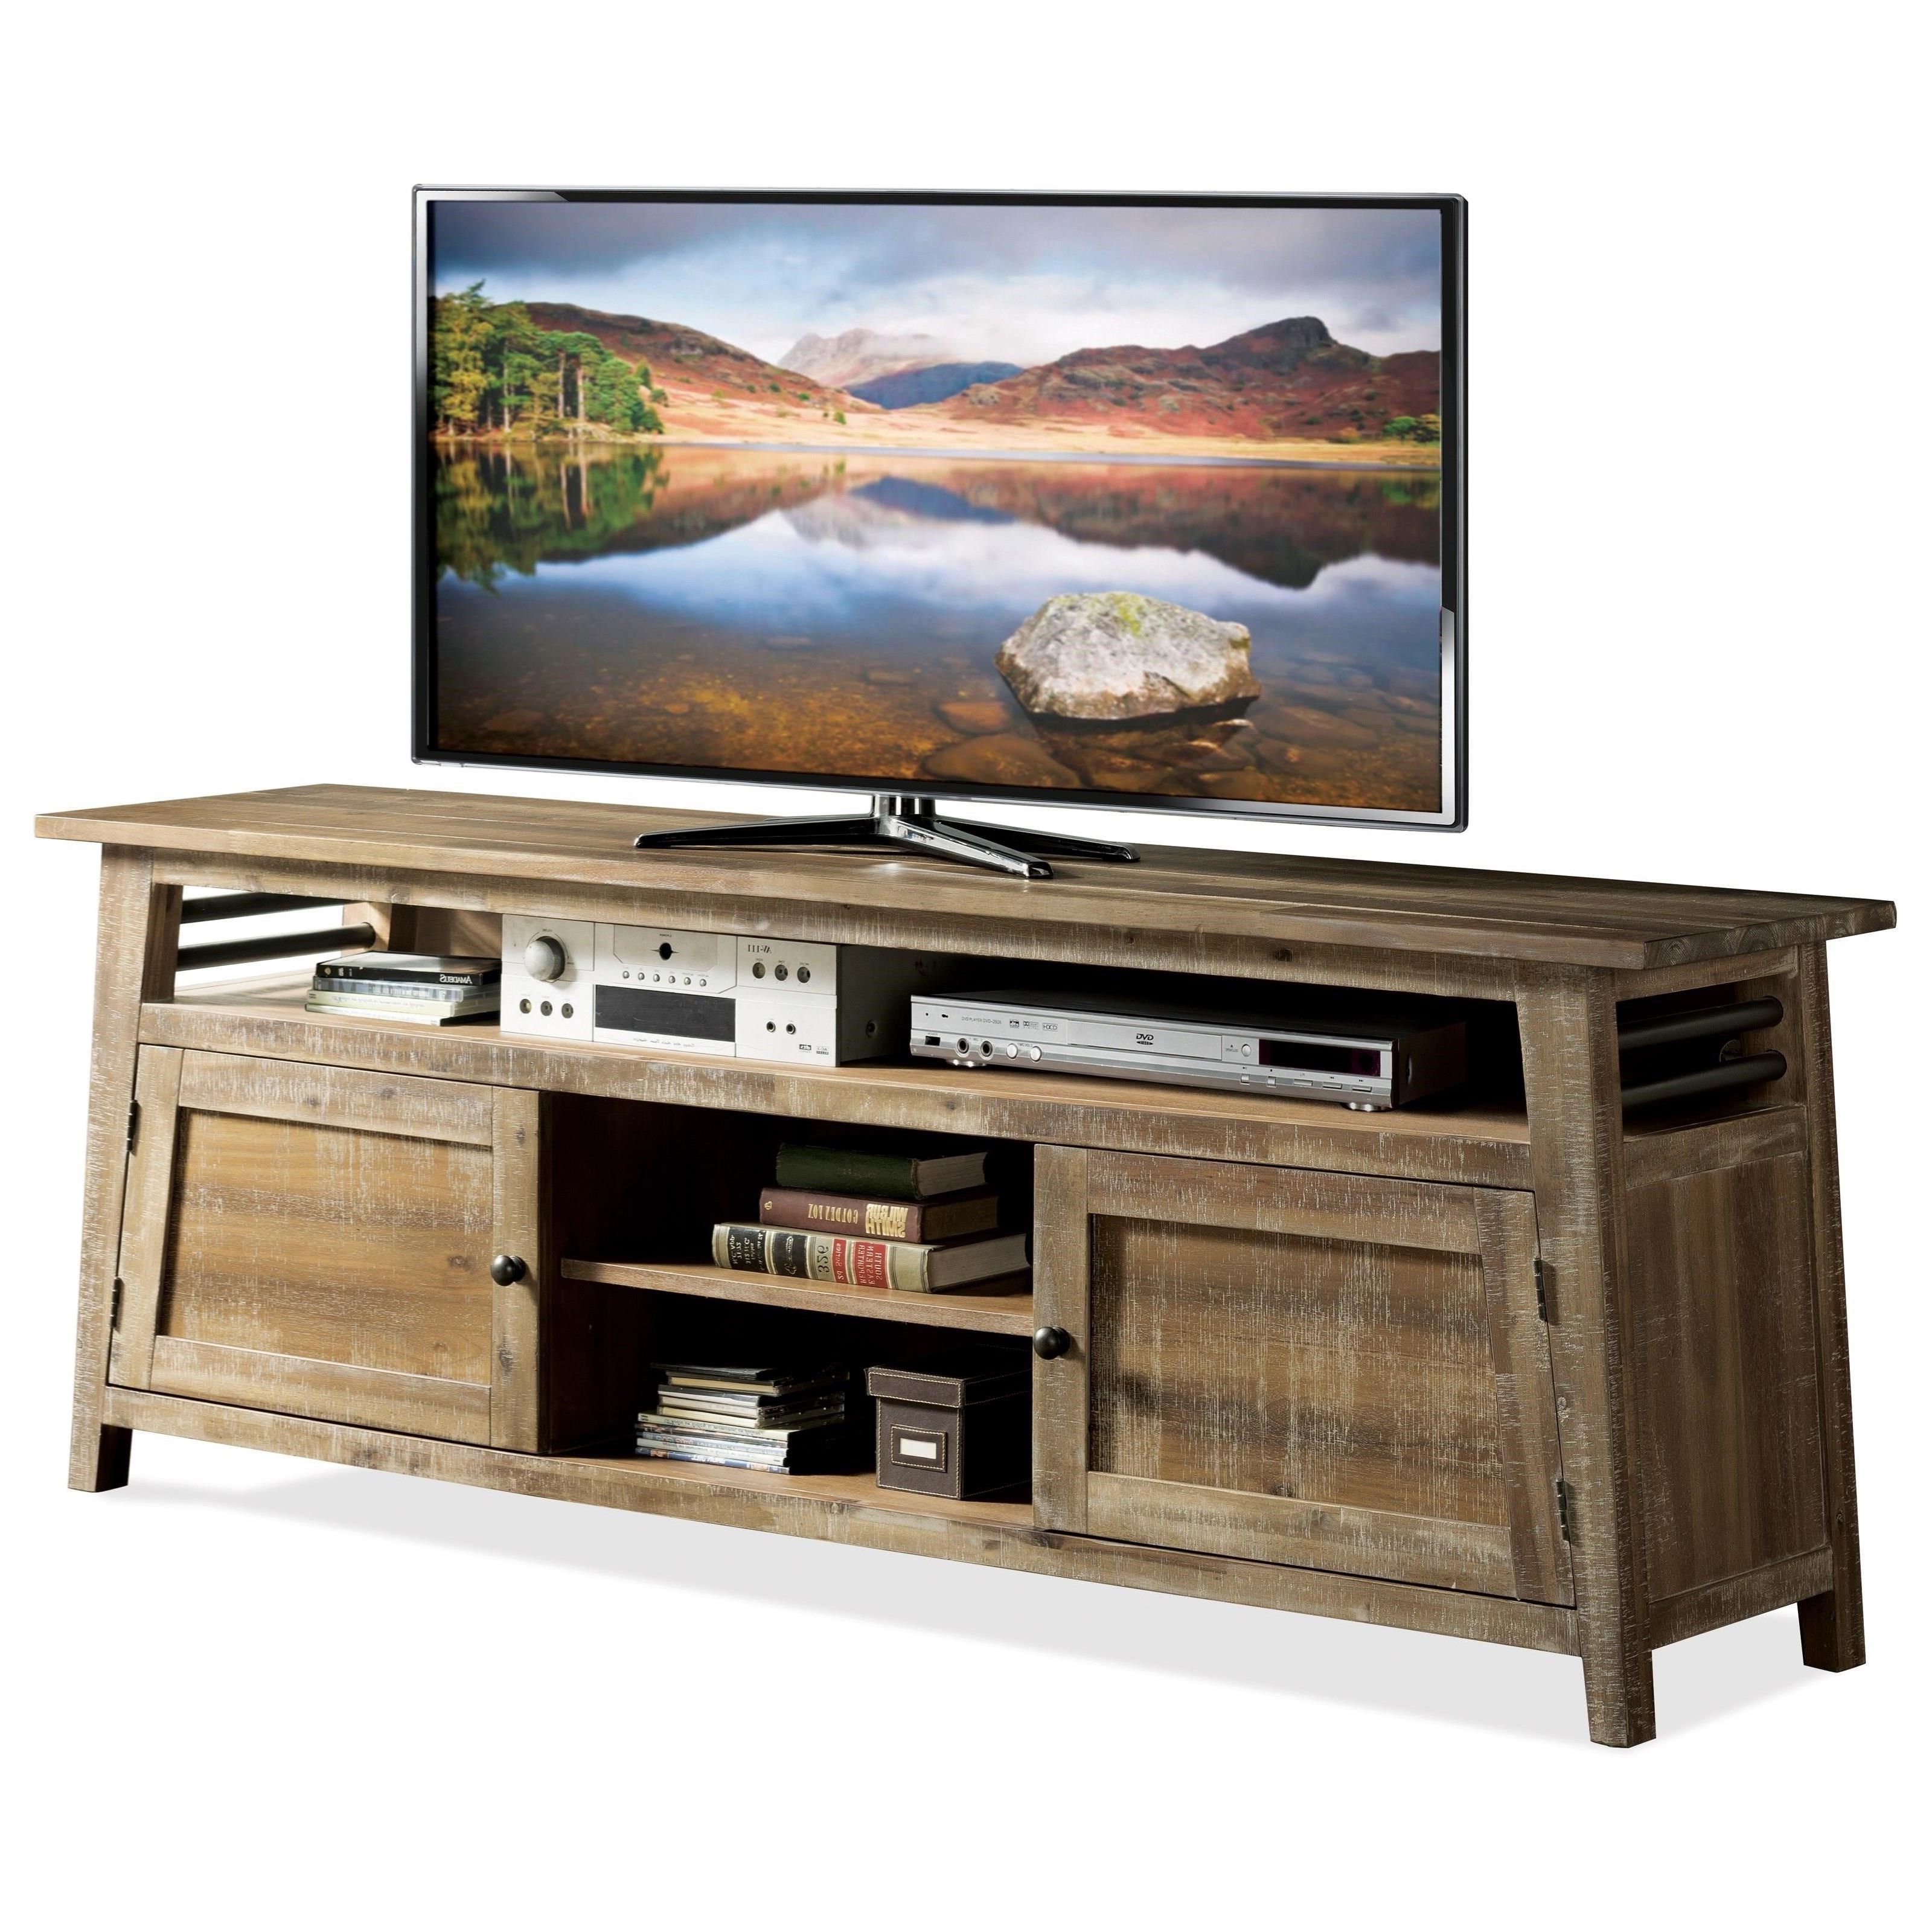 Riverside Furniture Rowan Industrial 76 Inch Tv Console With Wire Intended For Rowan 74 Inch Tv Stands (Gallery 1 of 20)